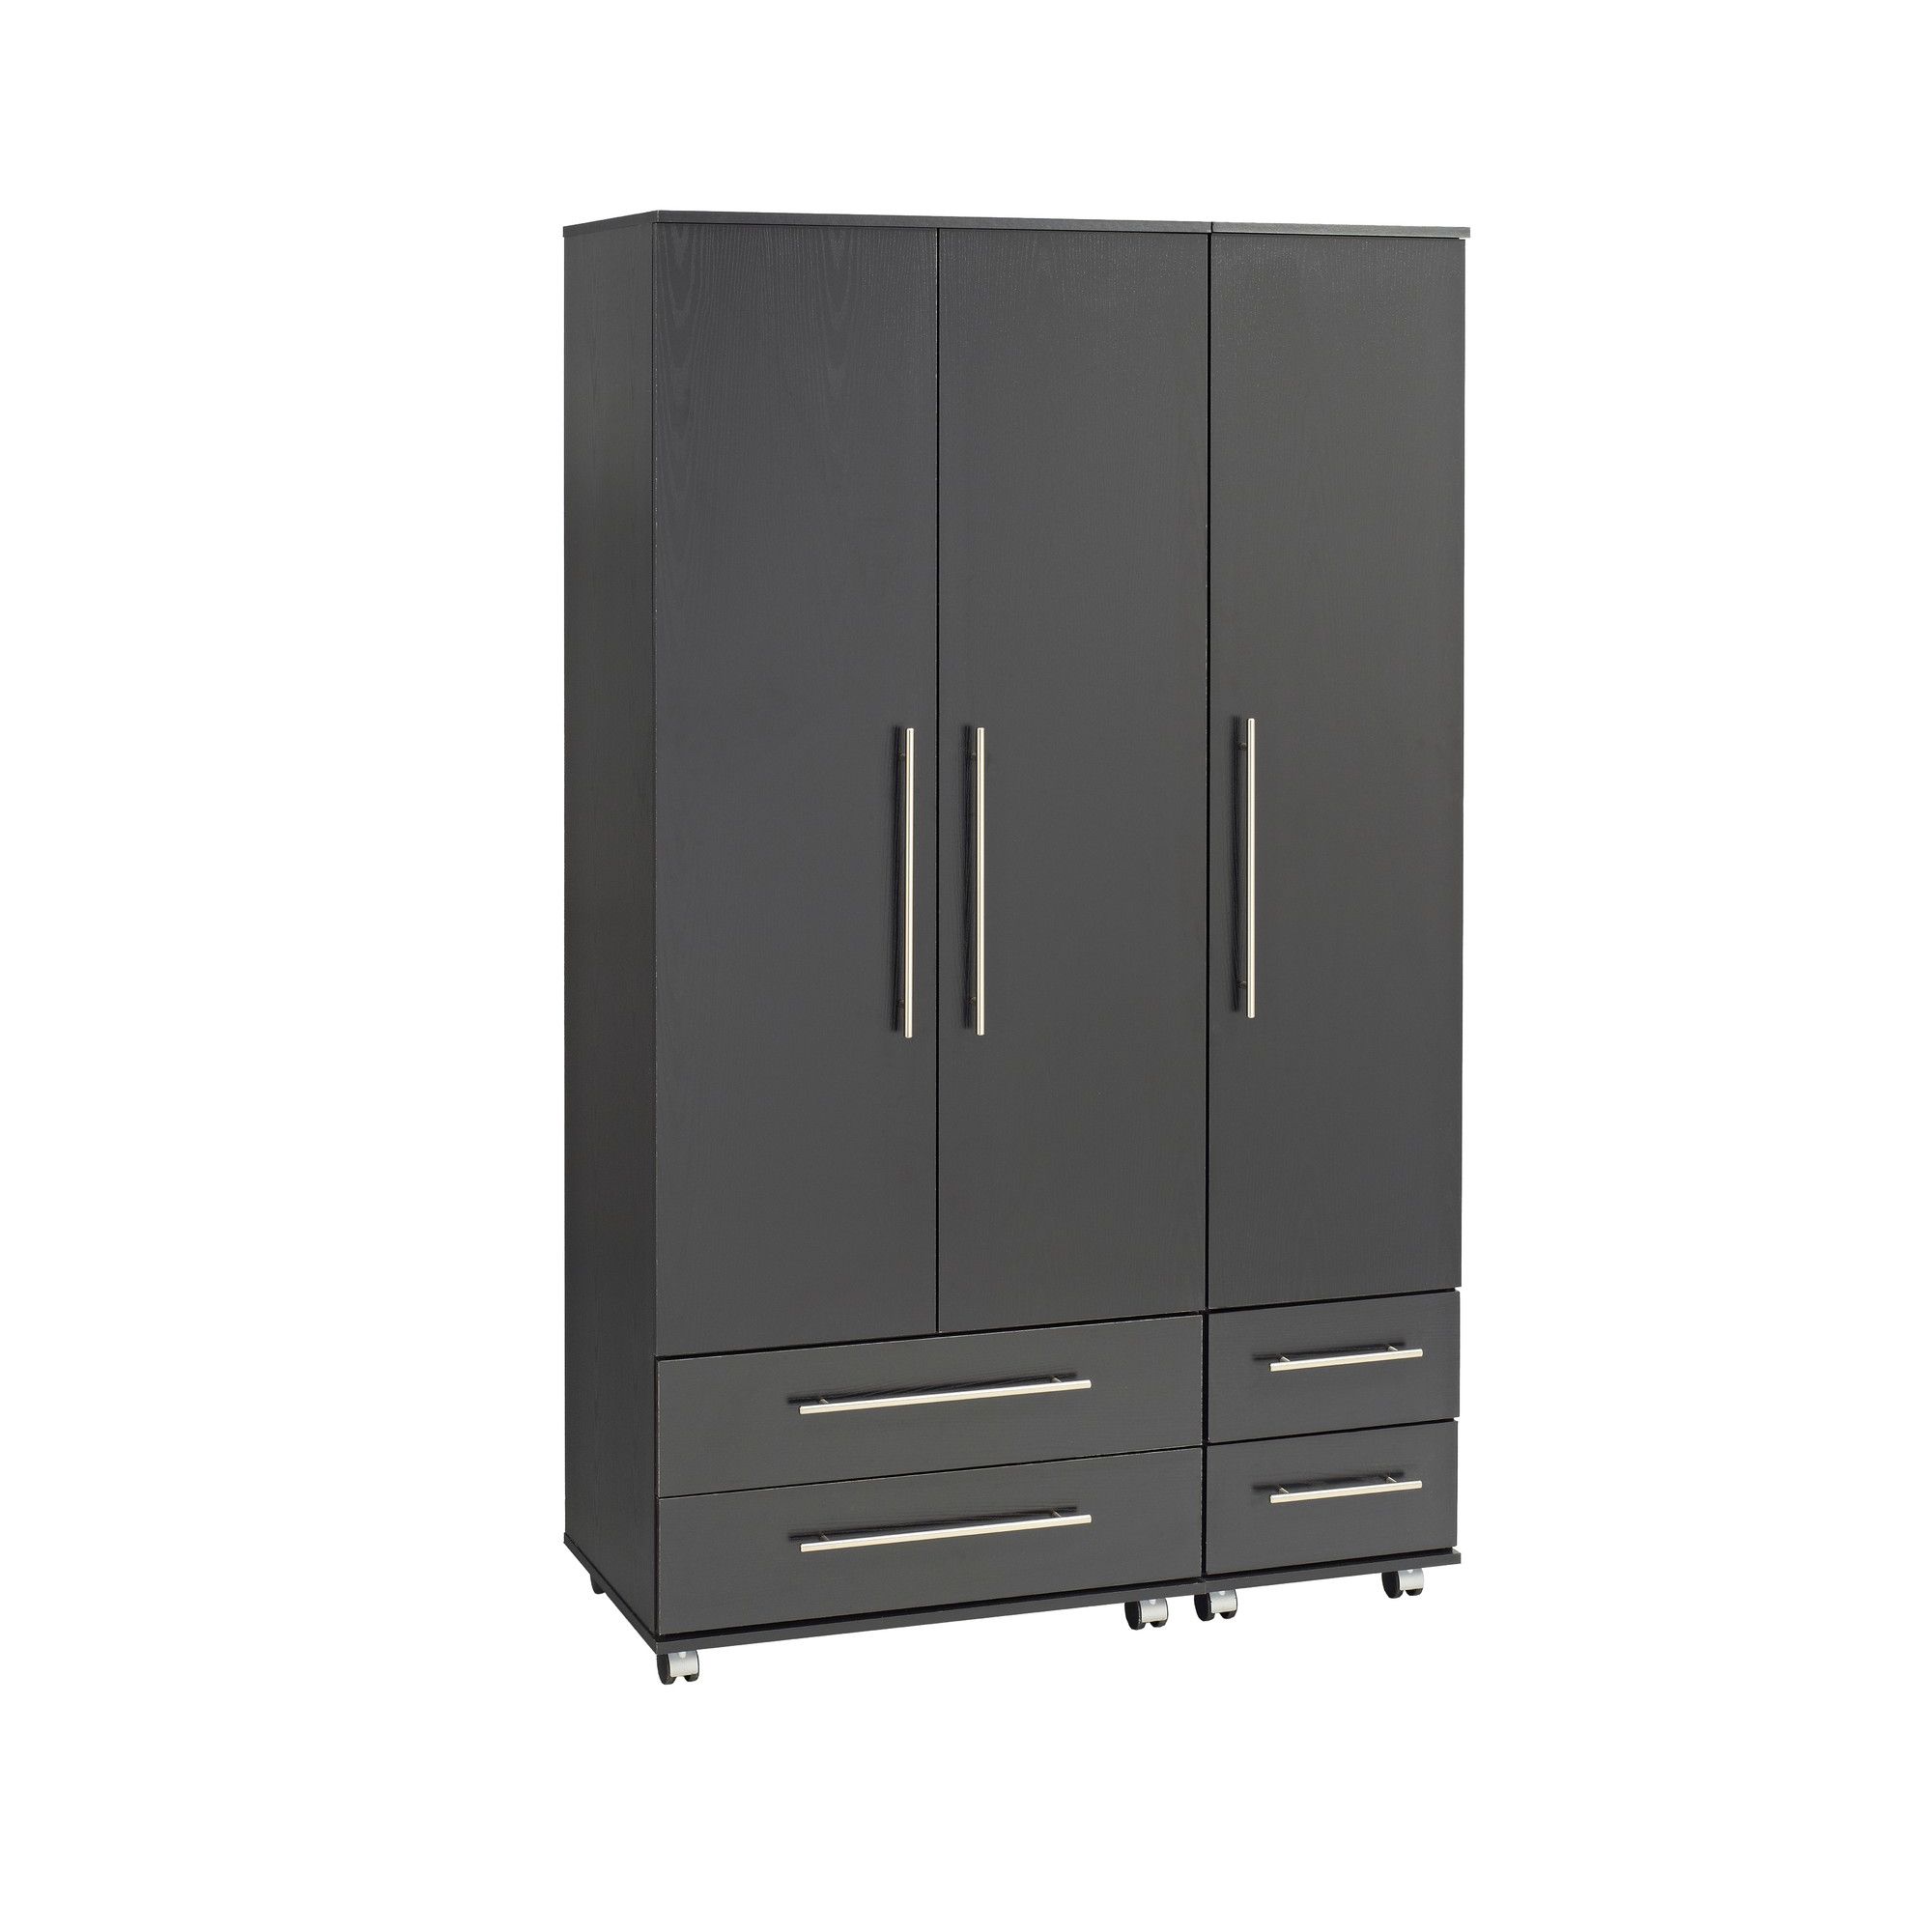 Ideal Furniture Bobby Triple Wardrobe with Four Drawers - Black at Tescos Direct